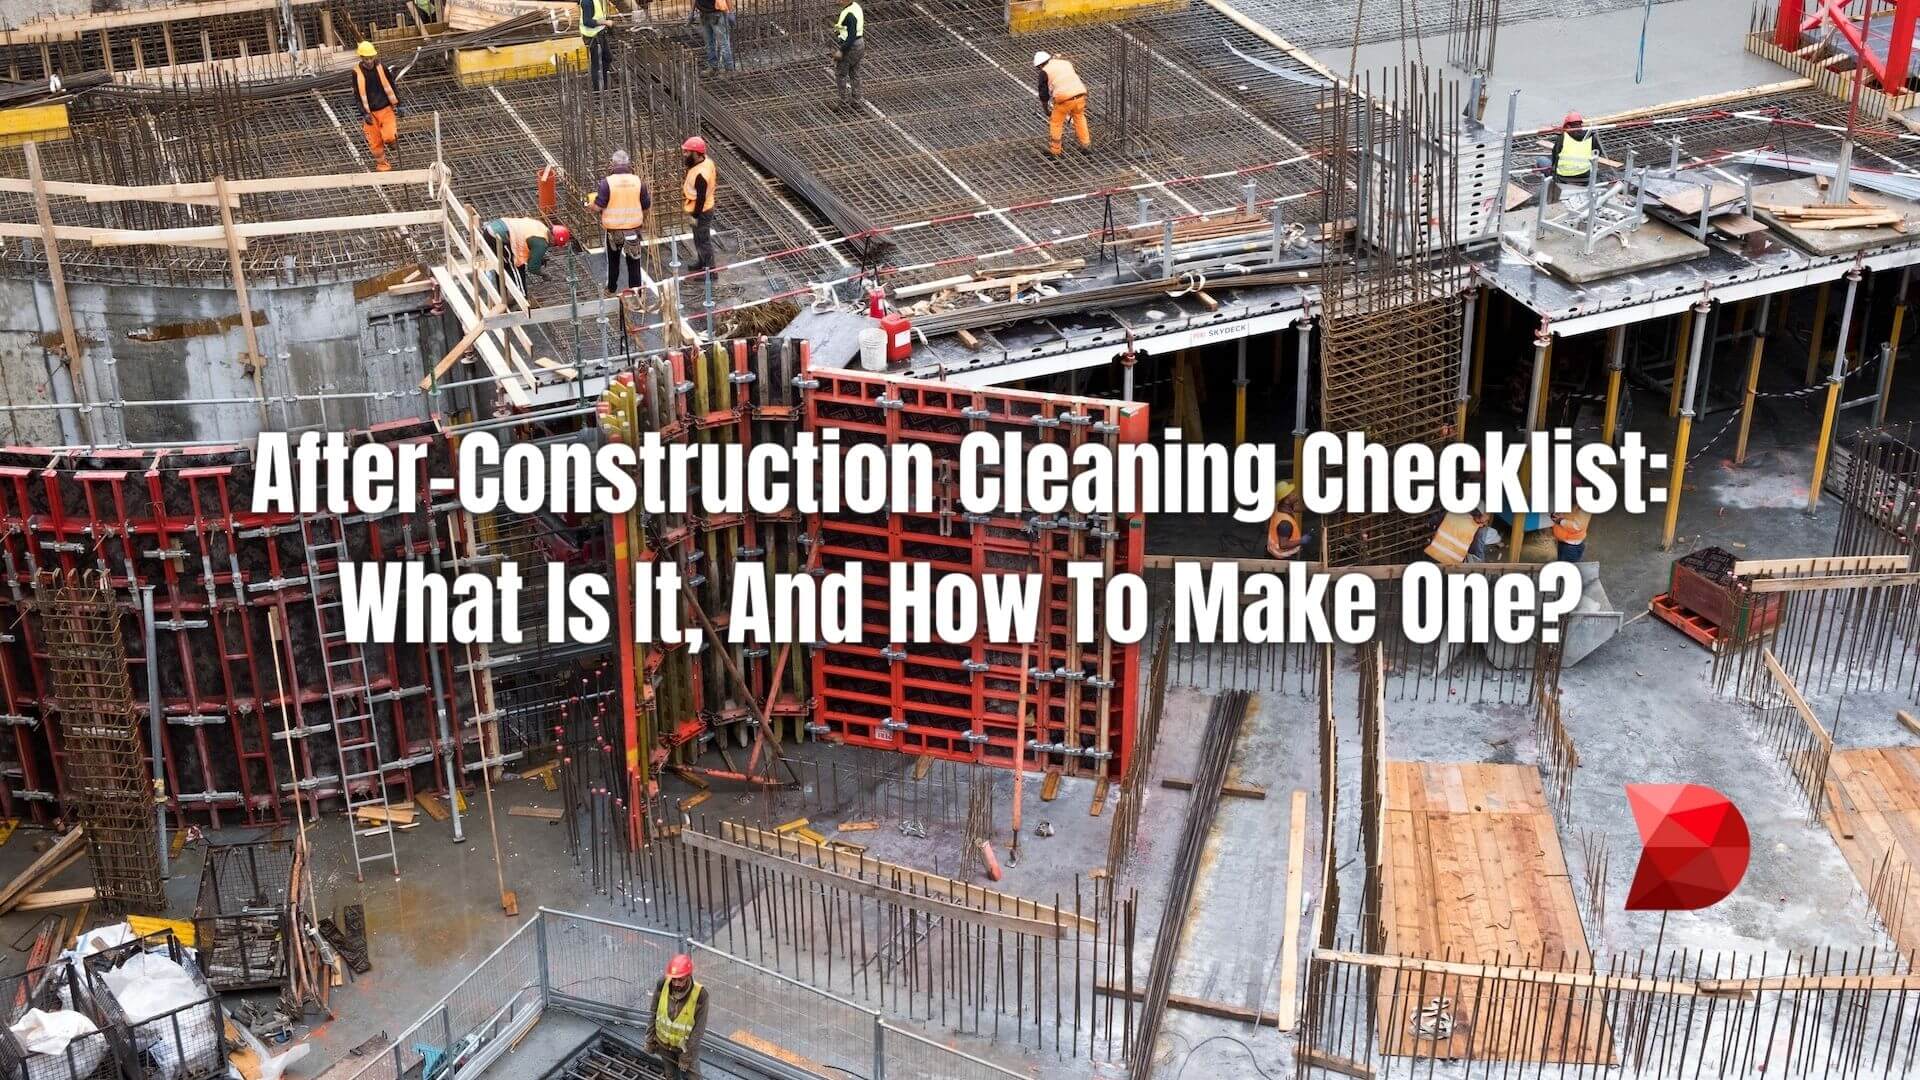 After working on the construction, the site must be cleaned for safety. Here's how to make an after-construction cleaning checklist.